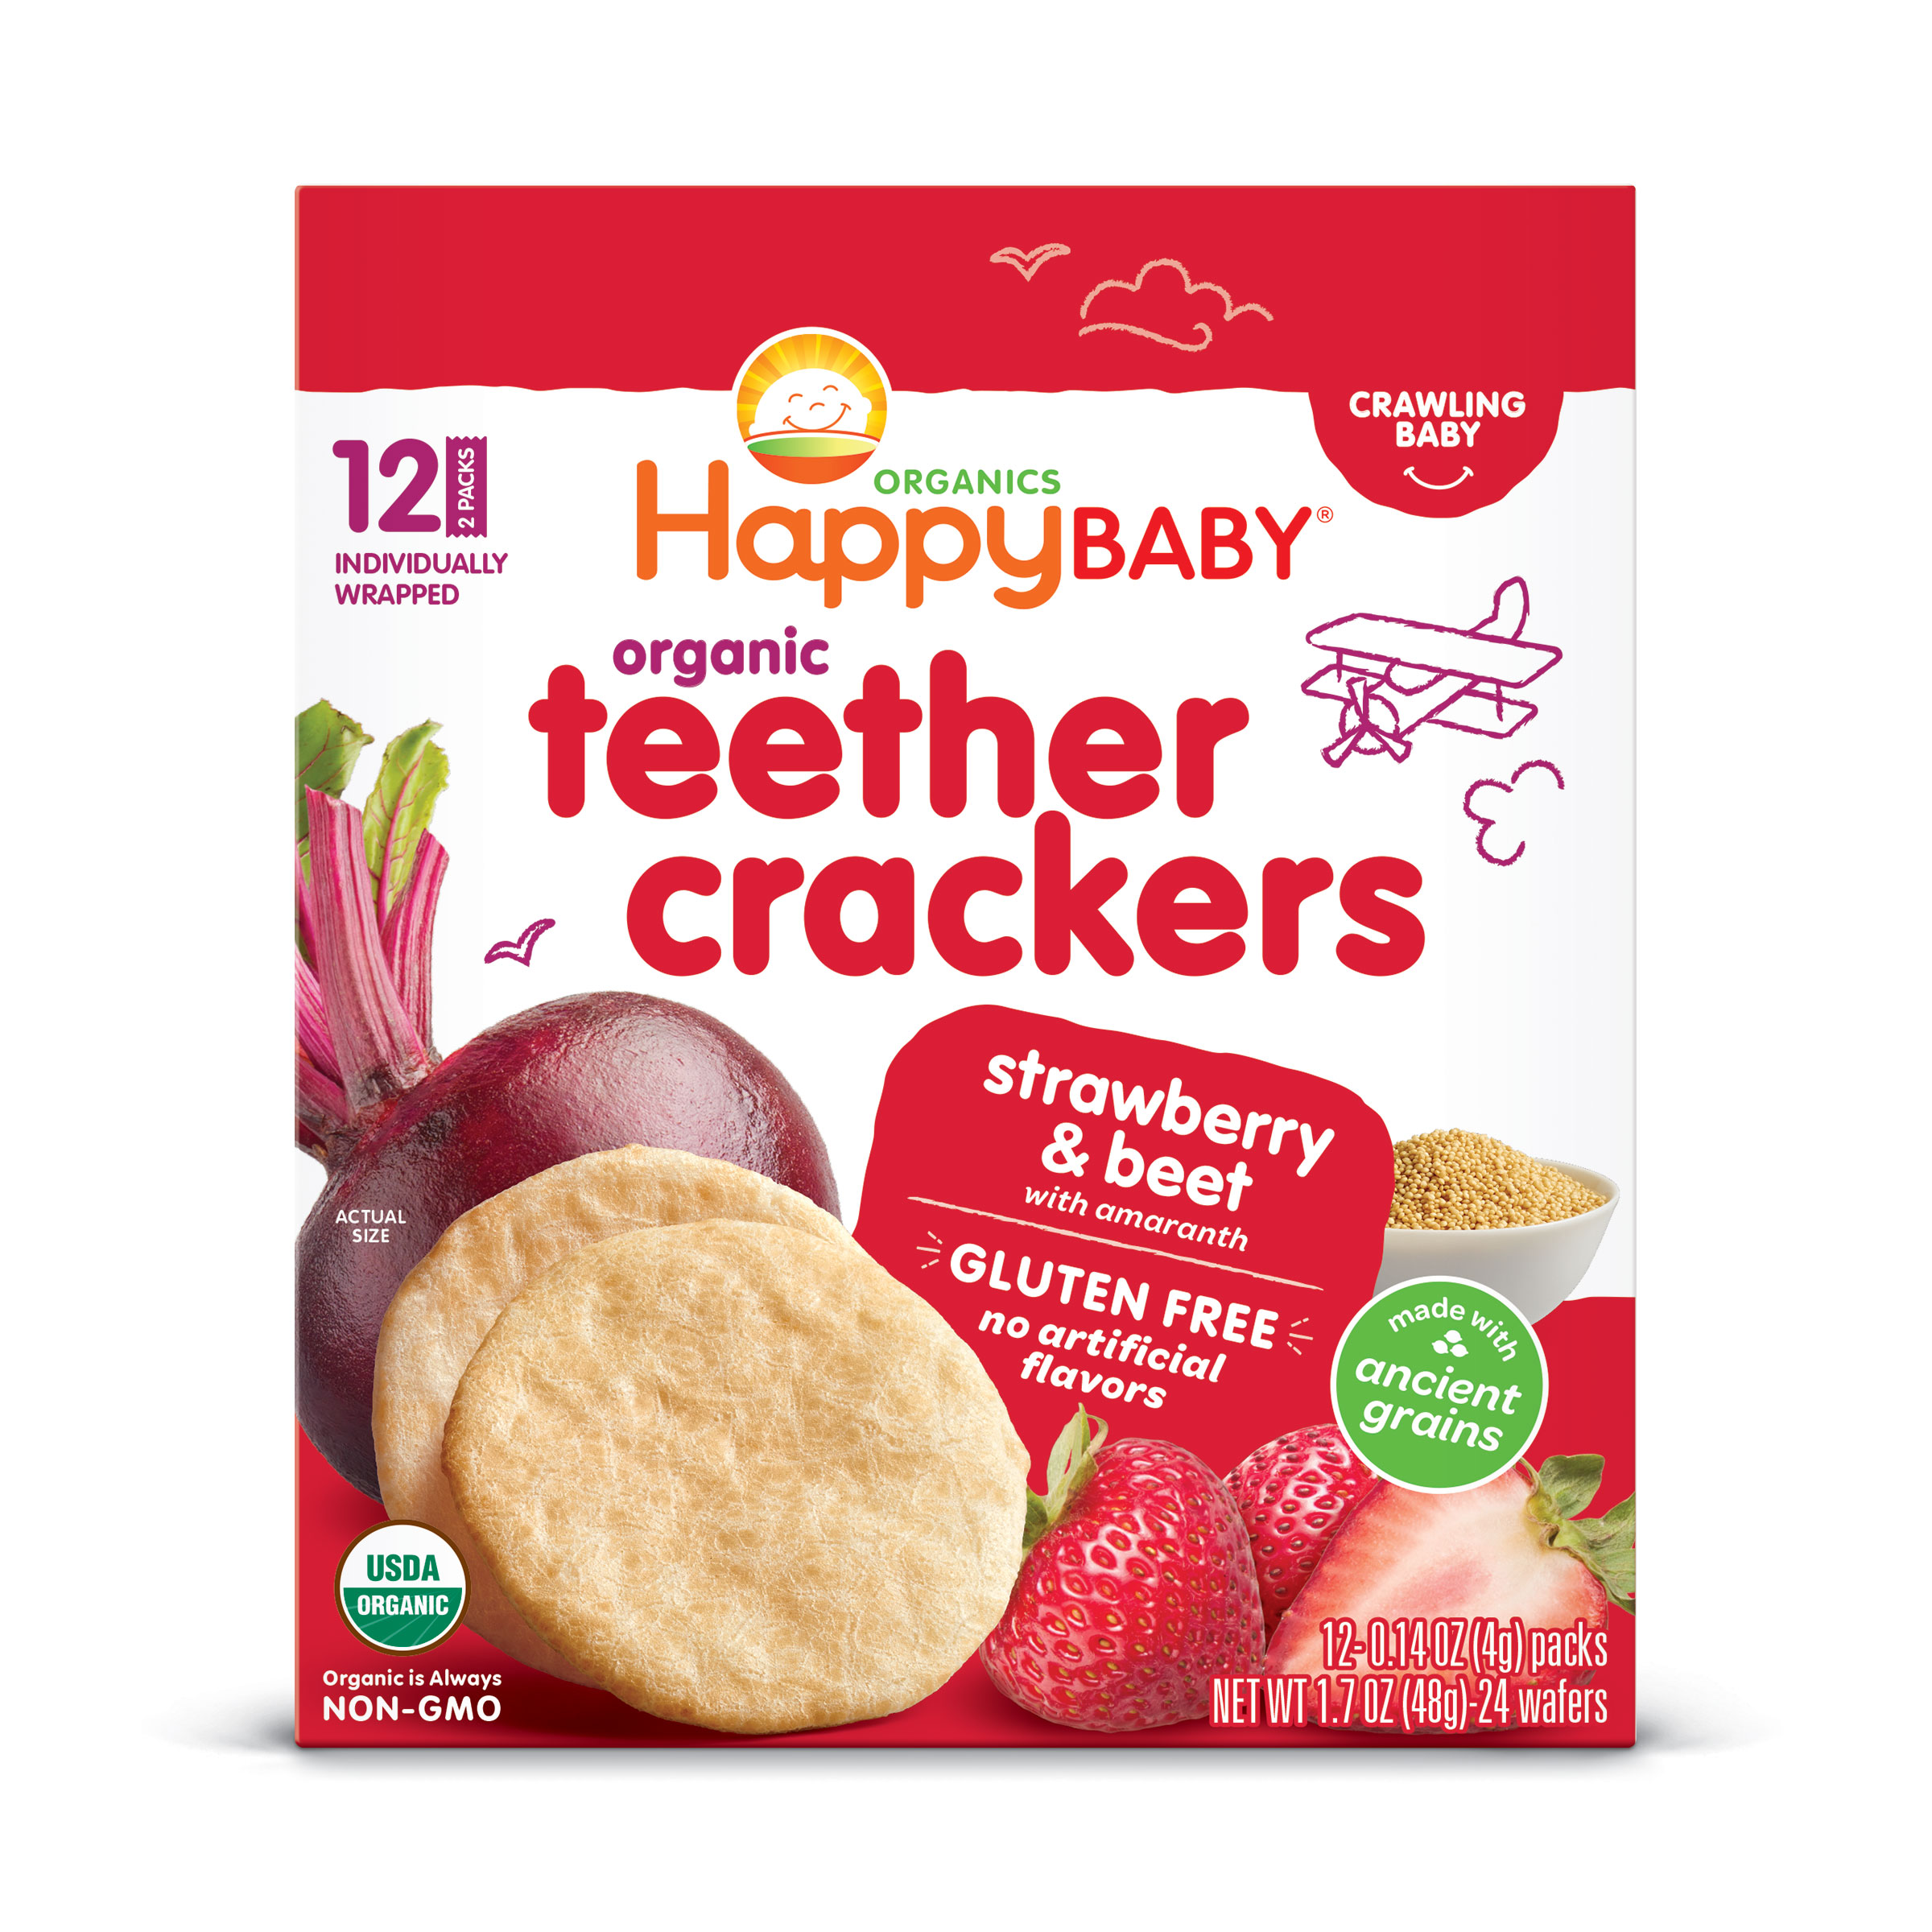 Happy Baby Strawberry & Beet with Amaranth Teether Crackers 6 units per case 0.9 oz